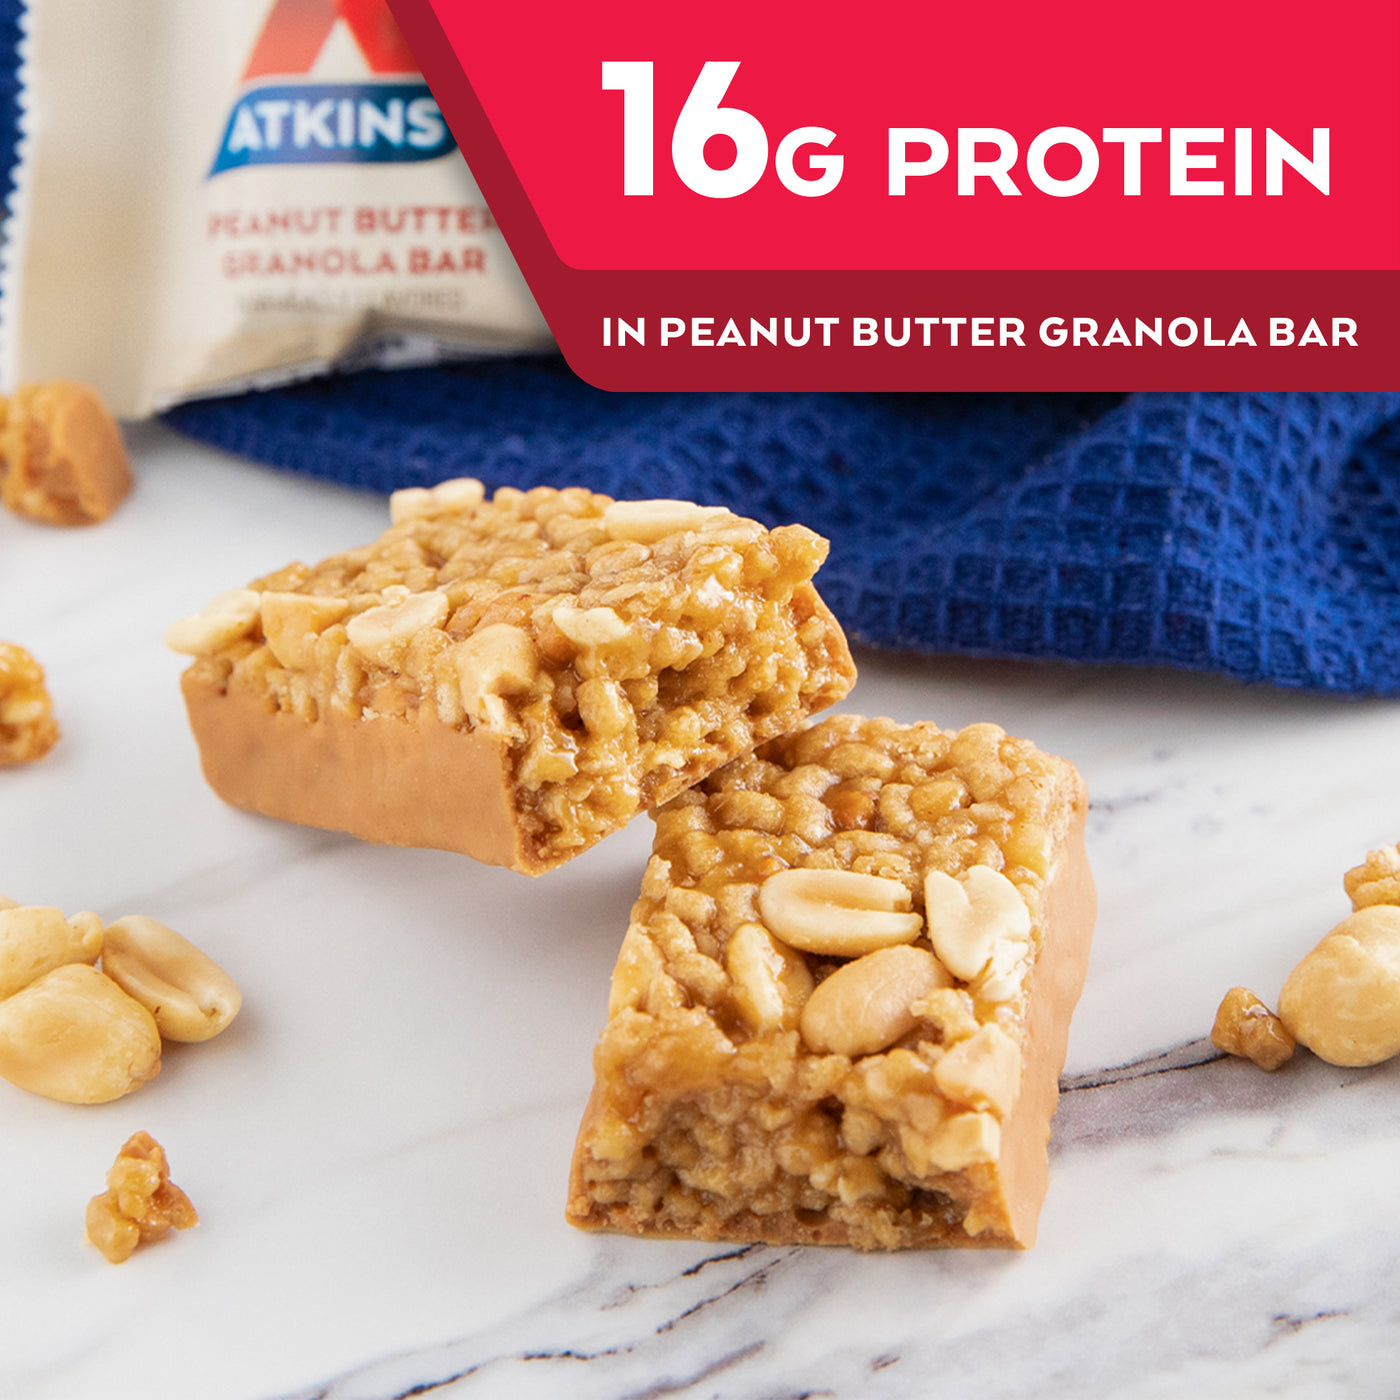 Peanut Butter Granola Bar with peanuts and blue cloth on marble table; 16G Protein in Peanut Butter Granola Bar